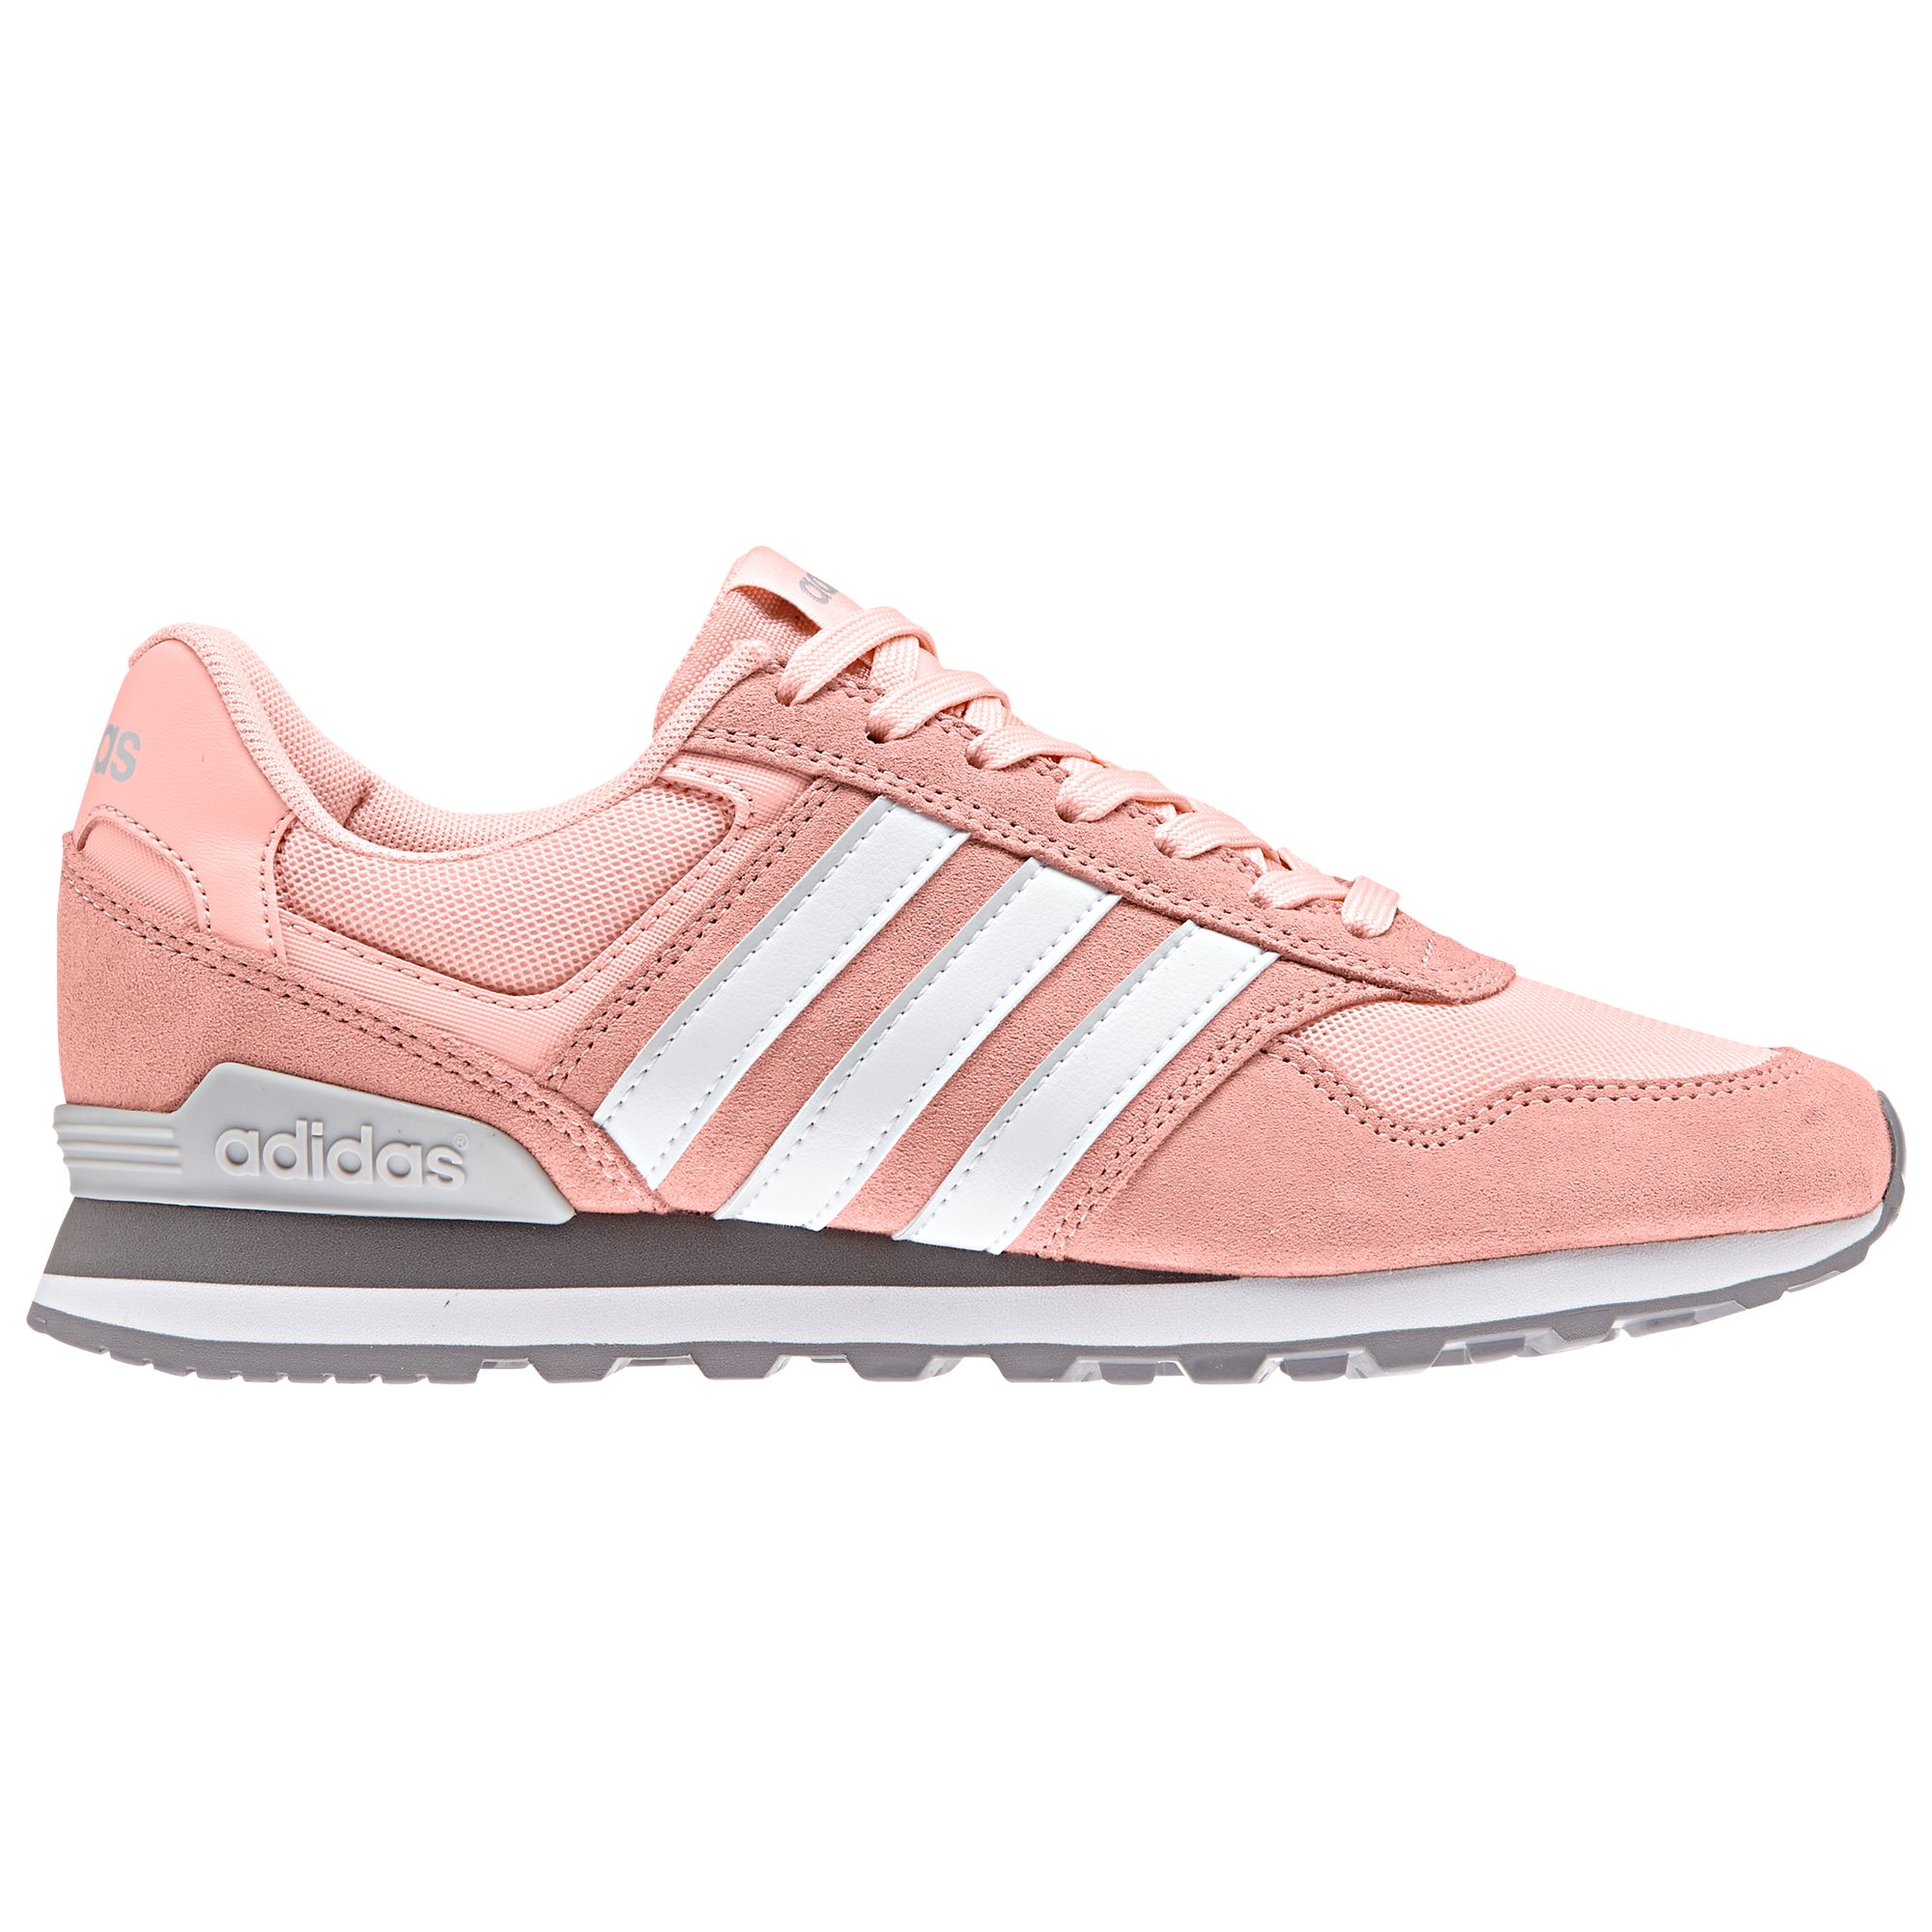 Adidas Neo 10K Casual Women's Trainers at John Lewis \u0026 Partners